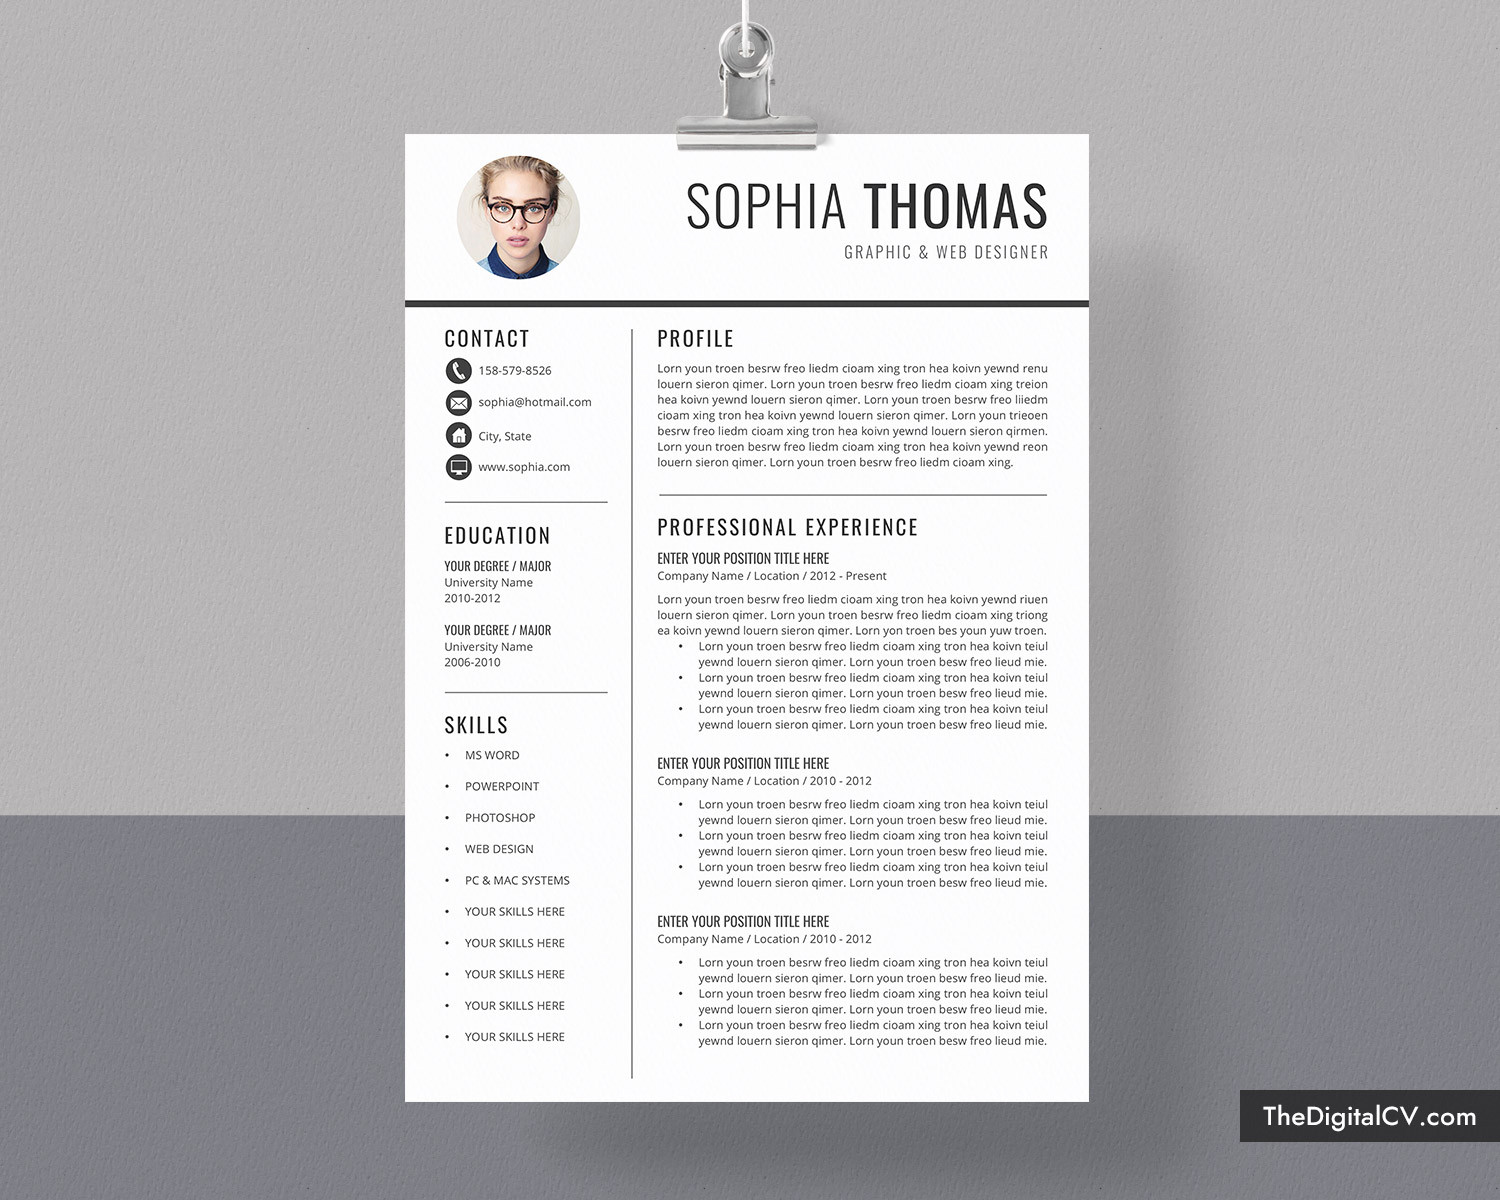 professional resume templates modern cv templates for instant office word resume templates for college students experienced professionals and career changers courtney resume bundle